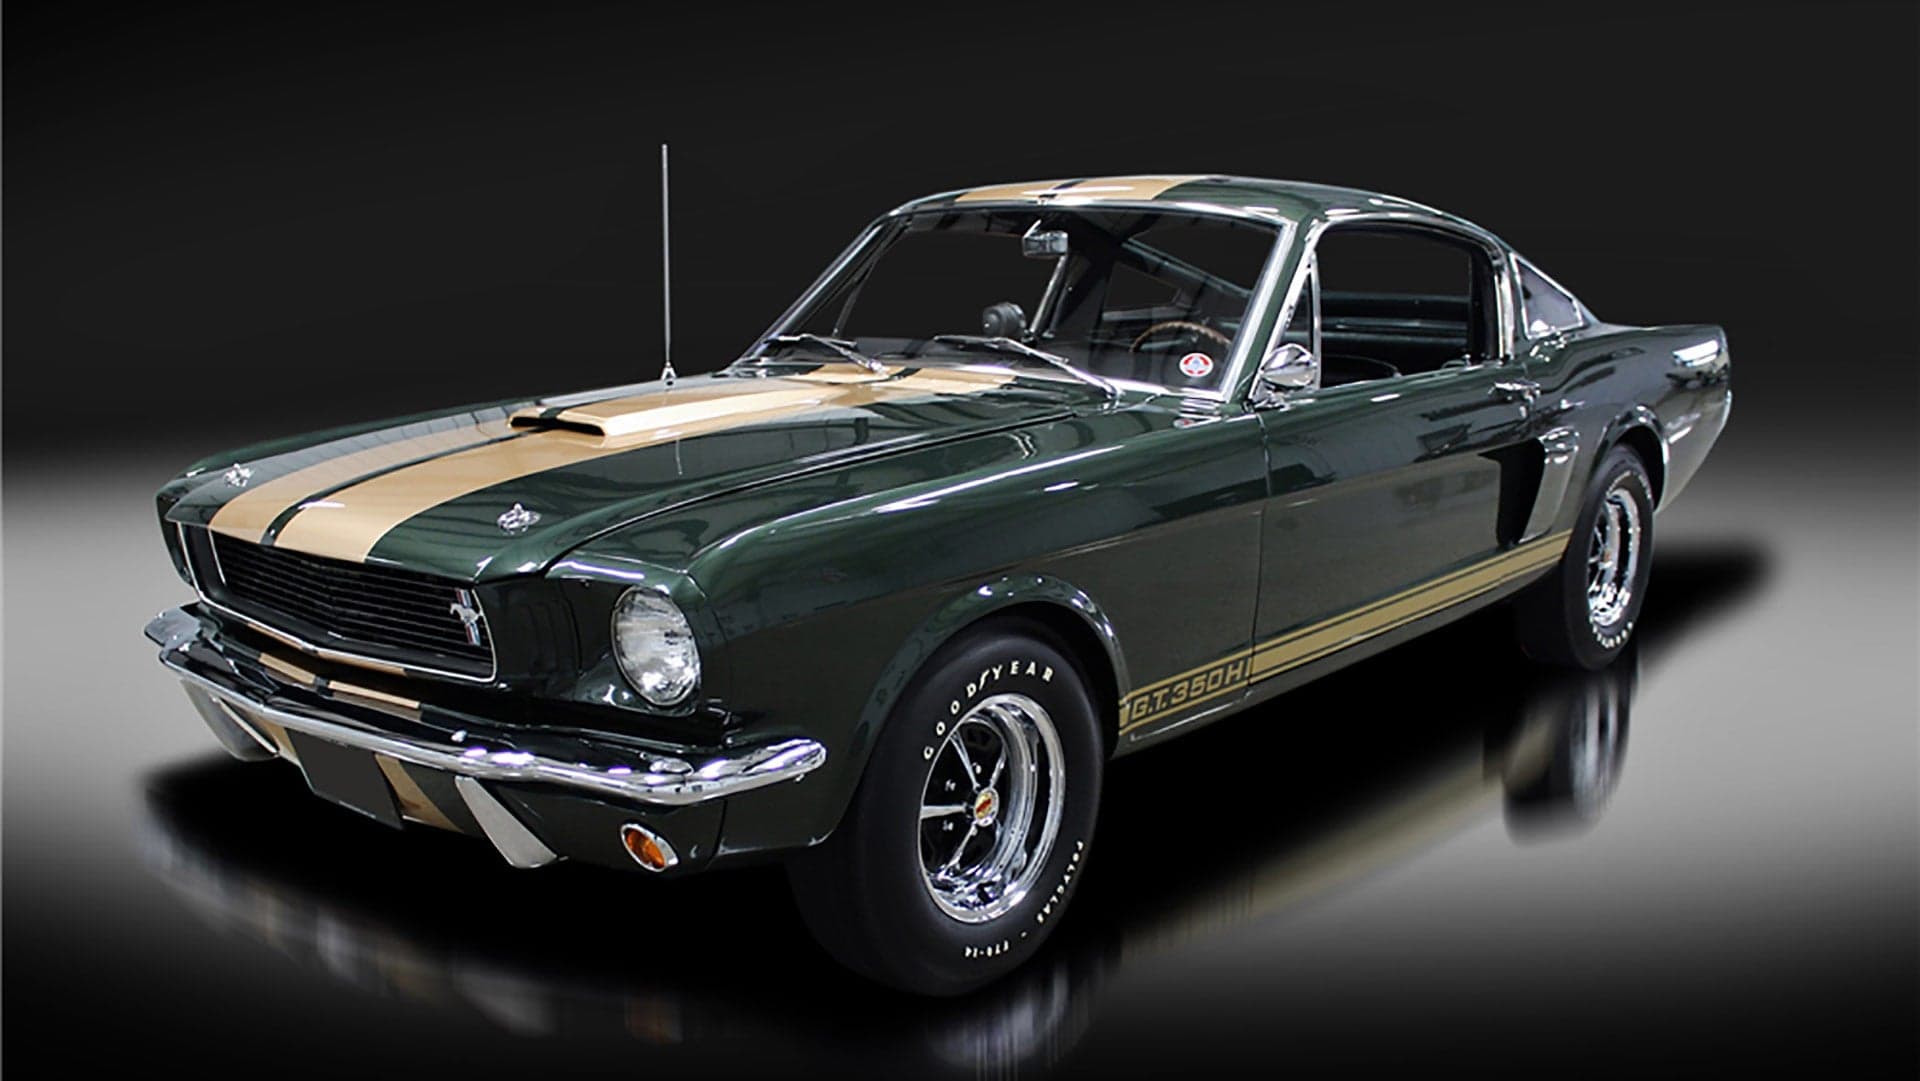 Barrett-Jackson to Auction Rare 1966 Shelby GT350-H Ford Mustang